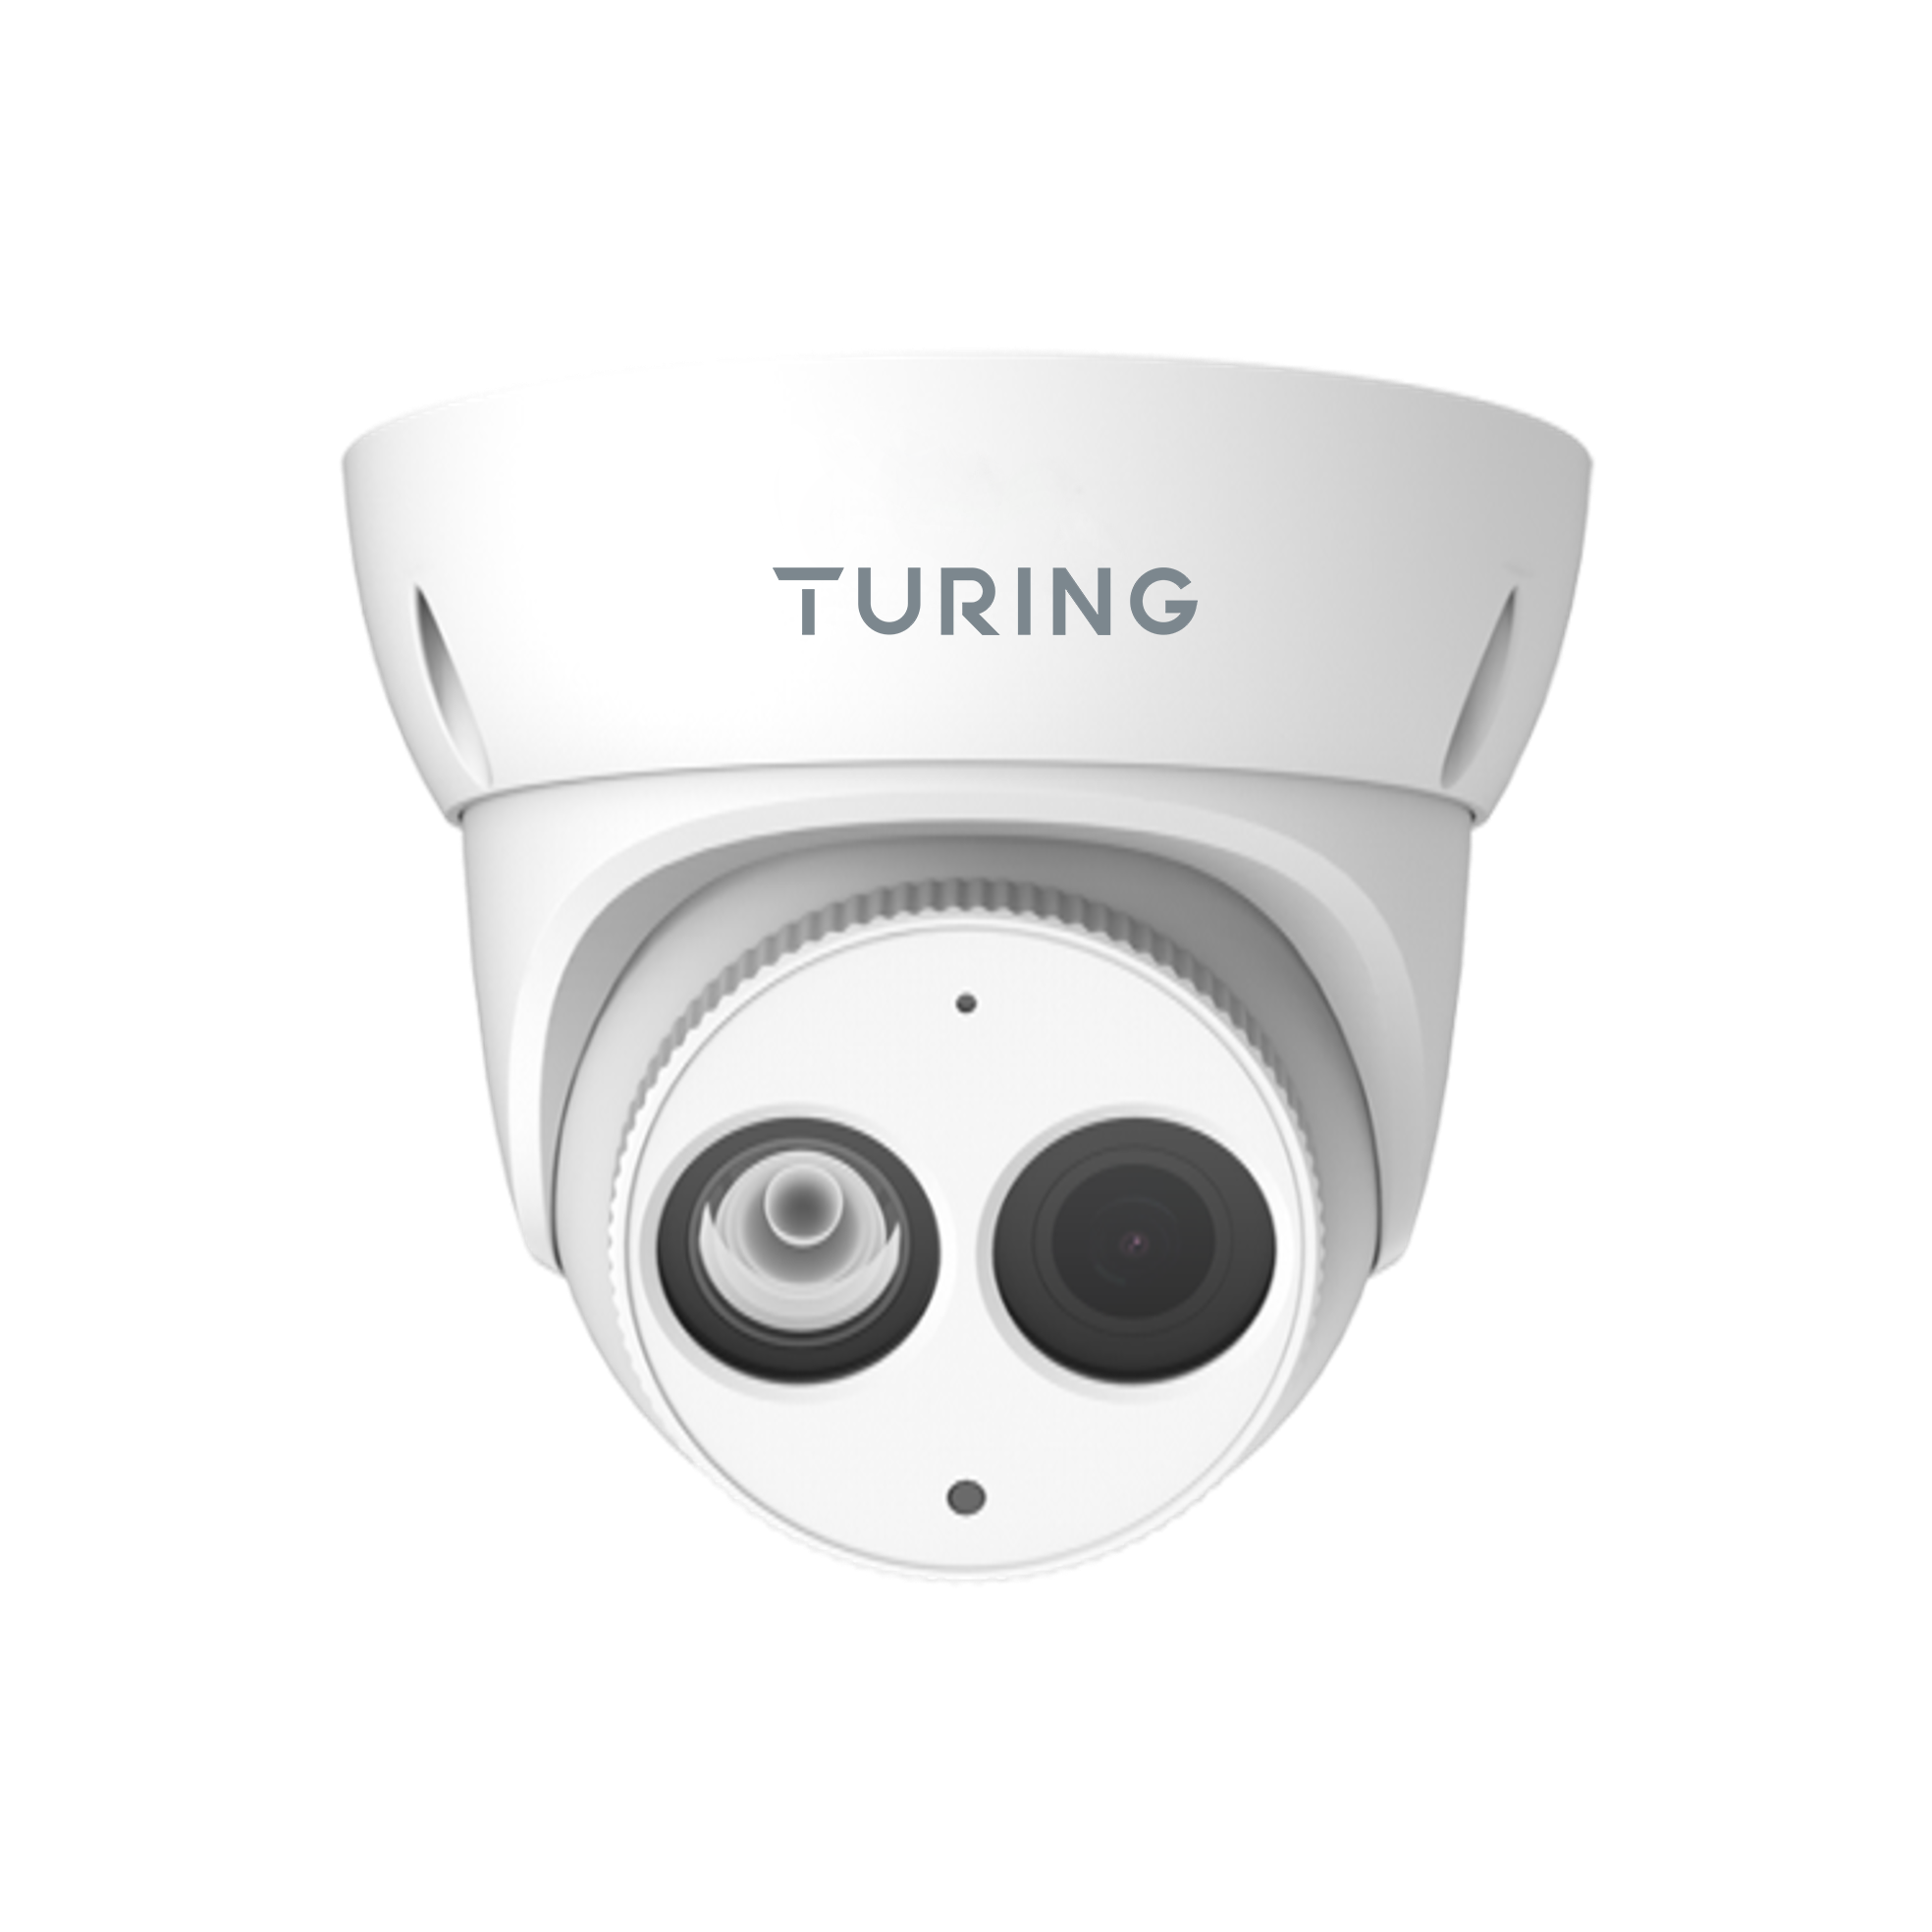 Turing Video 4MP/Tur/WDR/2.8/IR45F/IP6X/SD/People/ Car/Face - AiSurve.com - AI Surveillance: See, Analyze, Protect